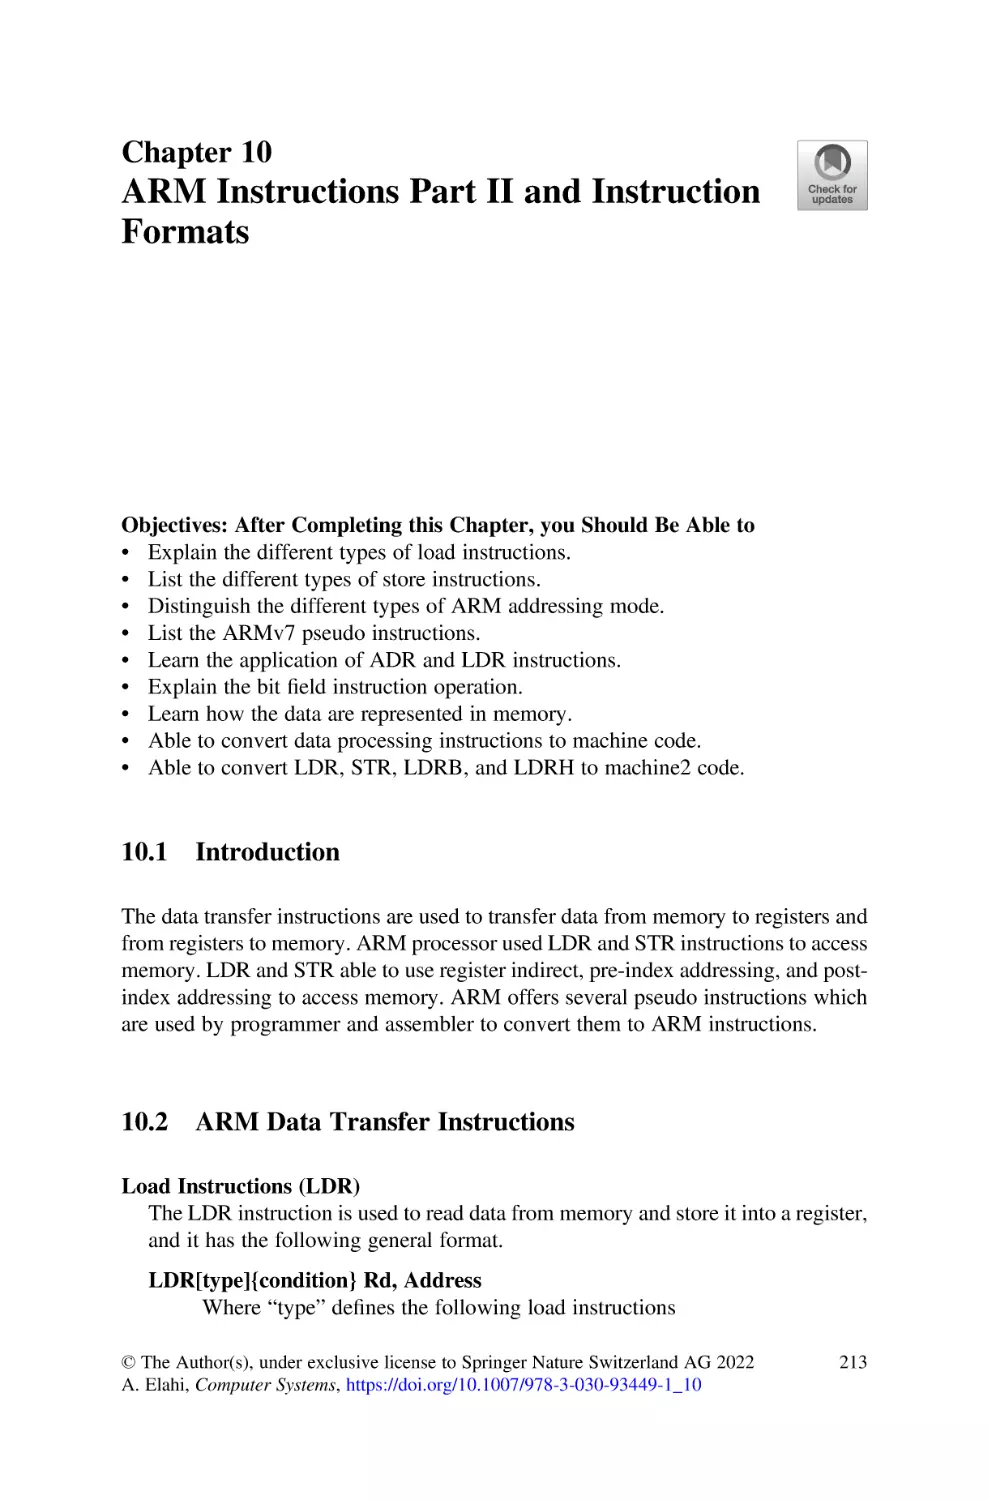 Chapter 10
10.1 Introduction
10.2 ARM Data Transfer Instructions